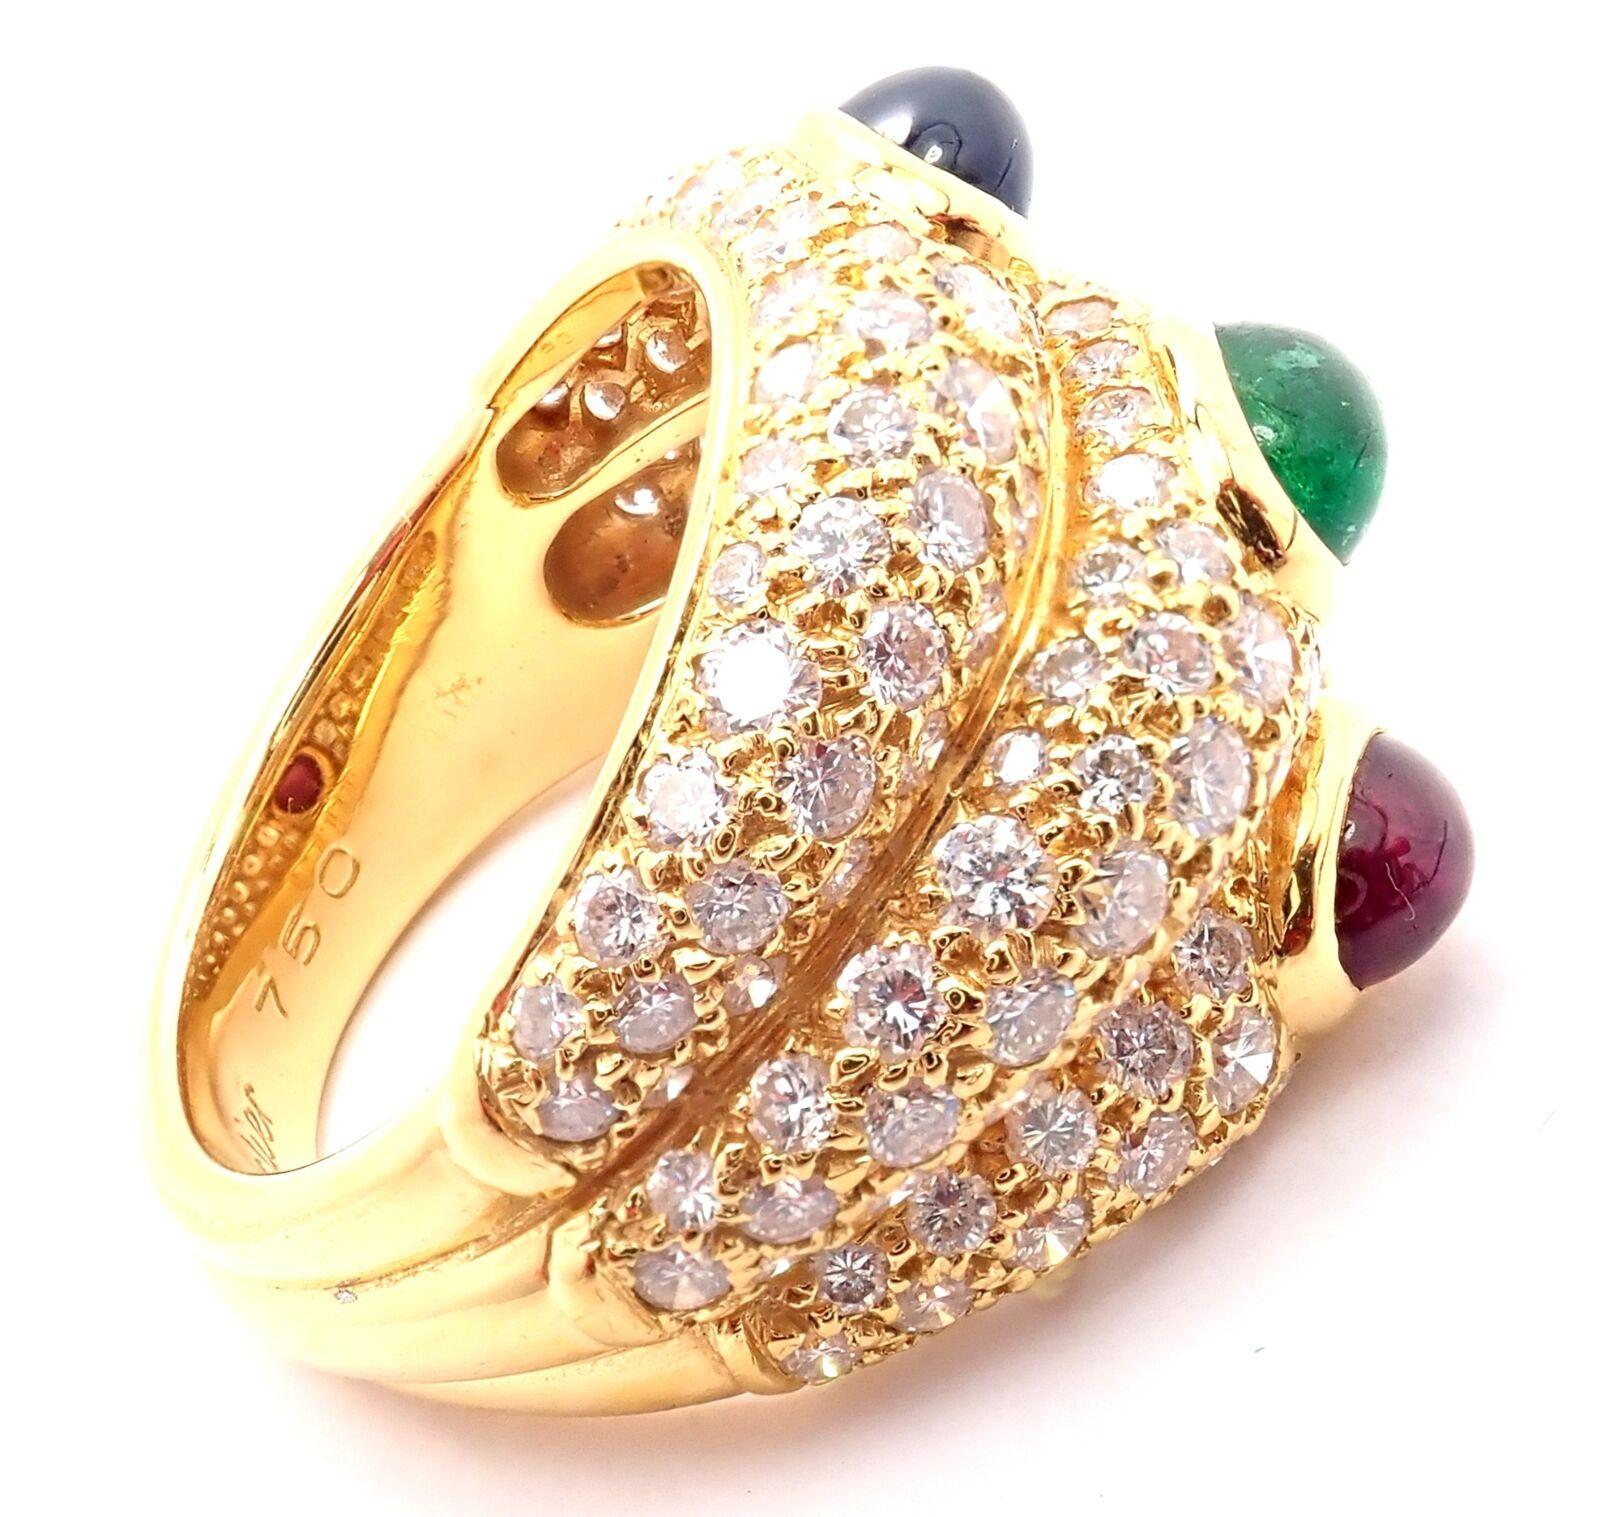 18k Yellow Gold Diamond Sapphire Emerald Ruby Wide Band Ring by Cartier.
With Round brilliant cut diamonds VVS1 clarity, F-H color total weight approximately 4ct
1 oval ruby, 1 oval emerald, 1 oval sapphire
Measurements:
Ring Size: European 54, US 6